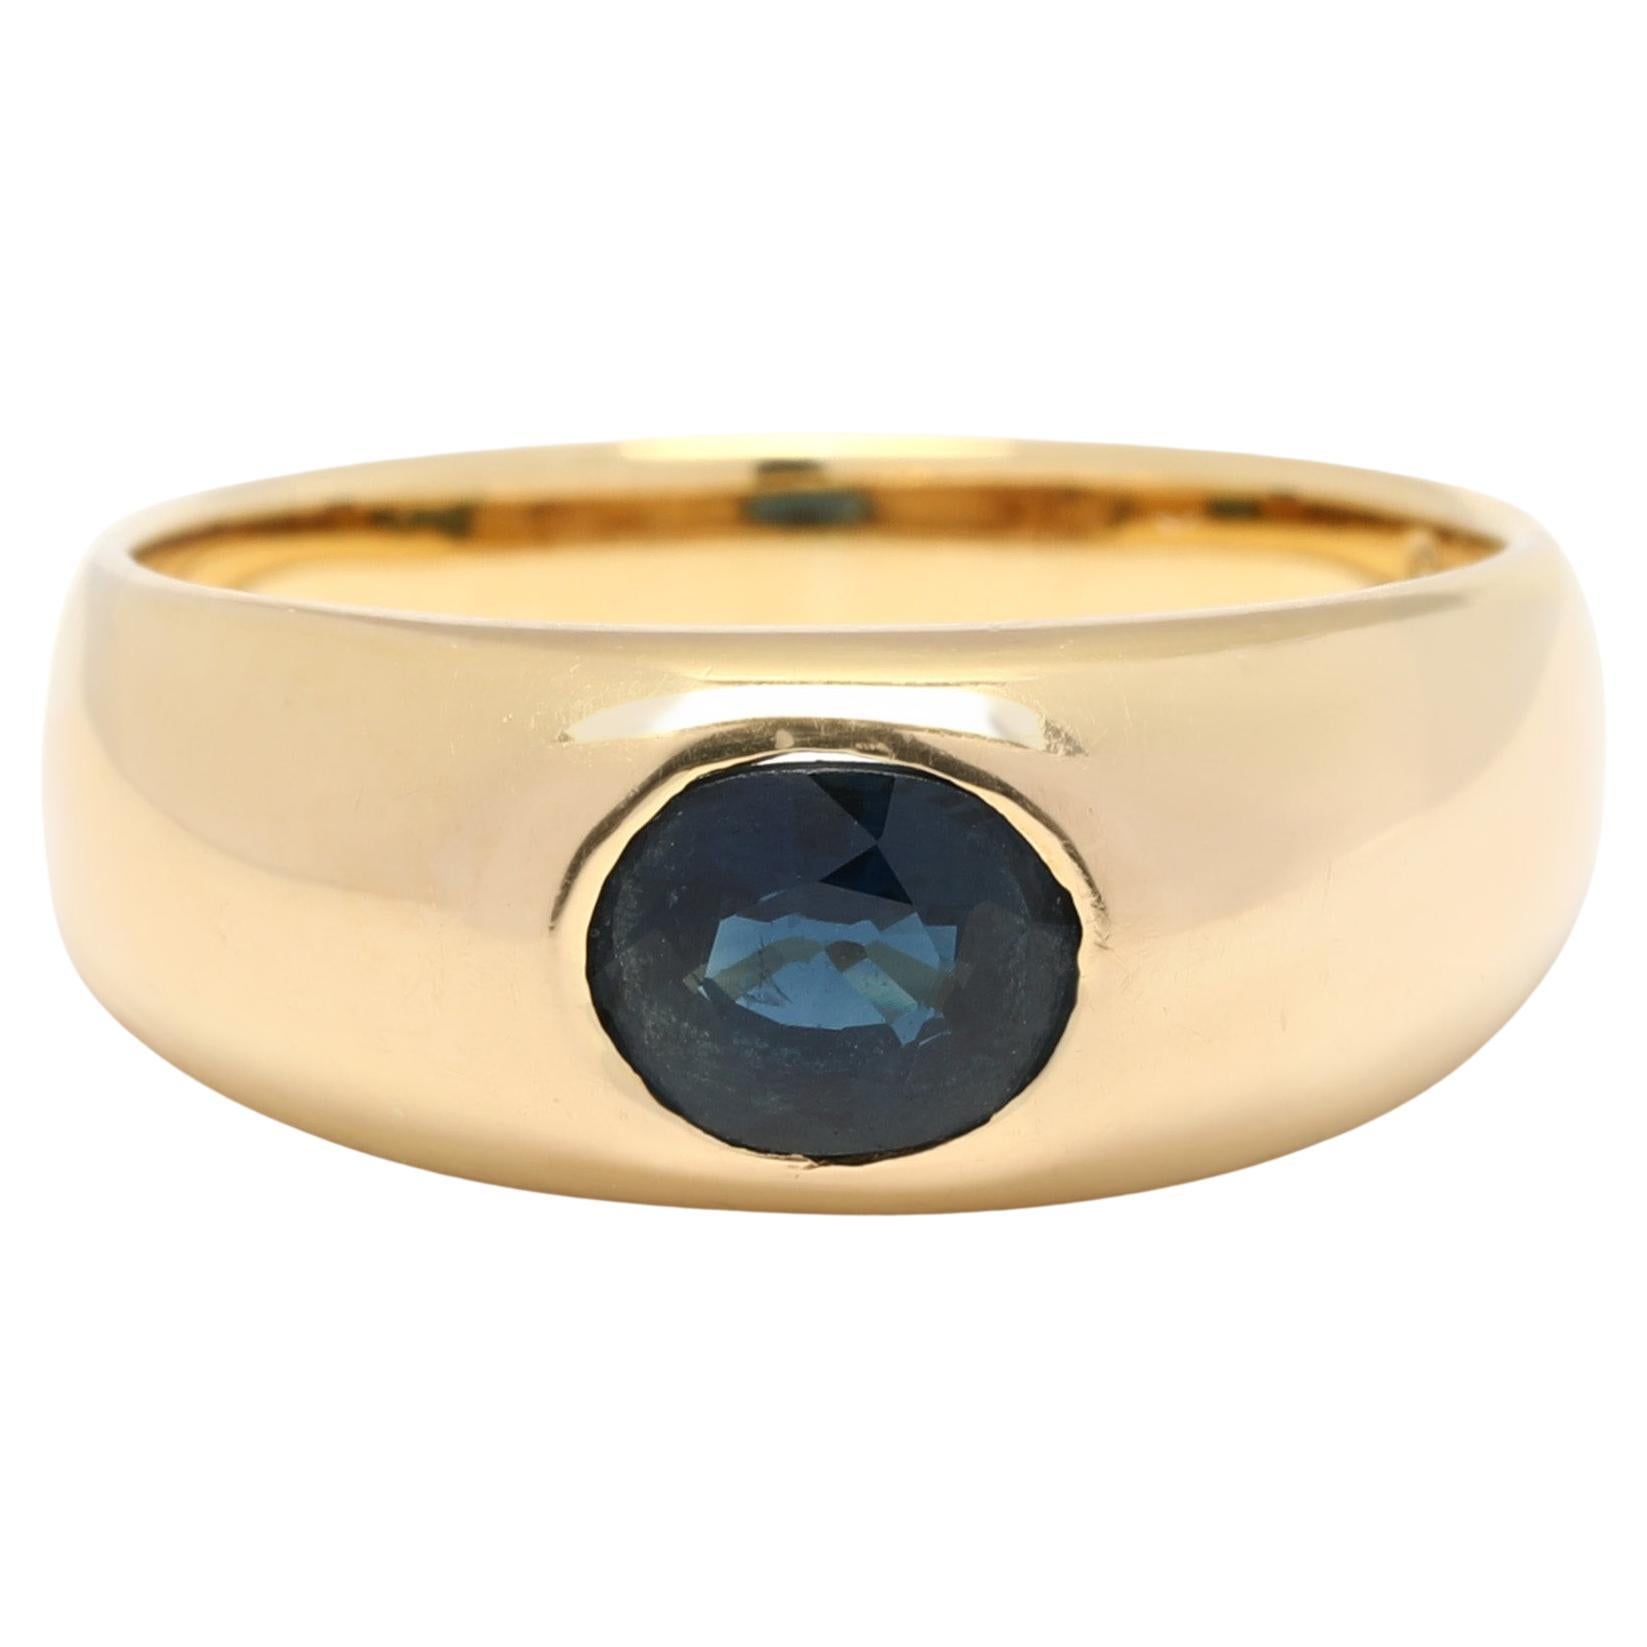 0.75ct Oval Blue Sapphire Ring, 18k YellowGold, Flush Set Sapphire Band, RS 5.75